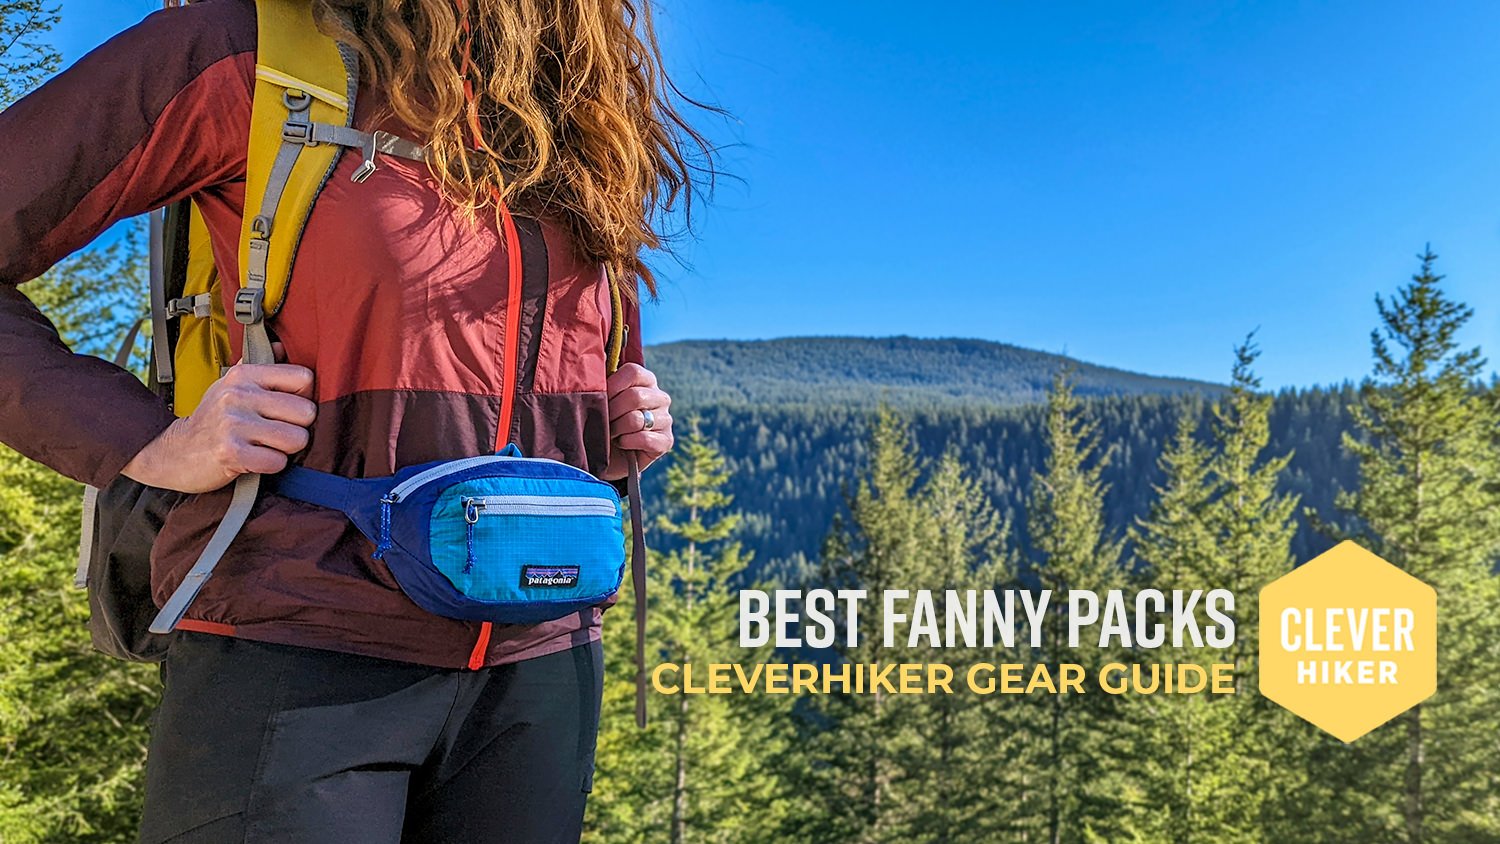 10 Best Fanny Packs For Hiking Of 2023 | Cleverhiker